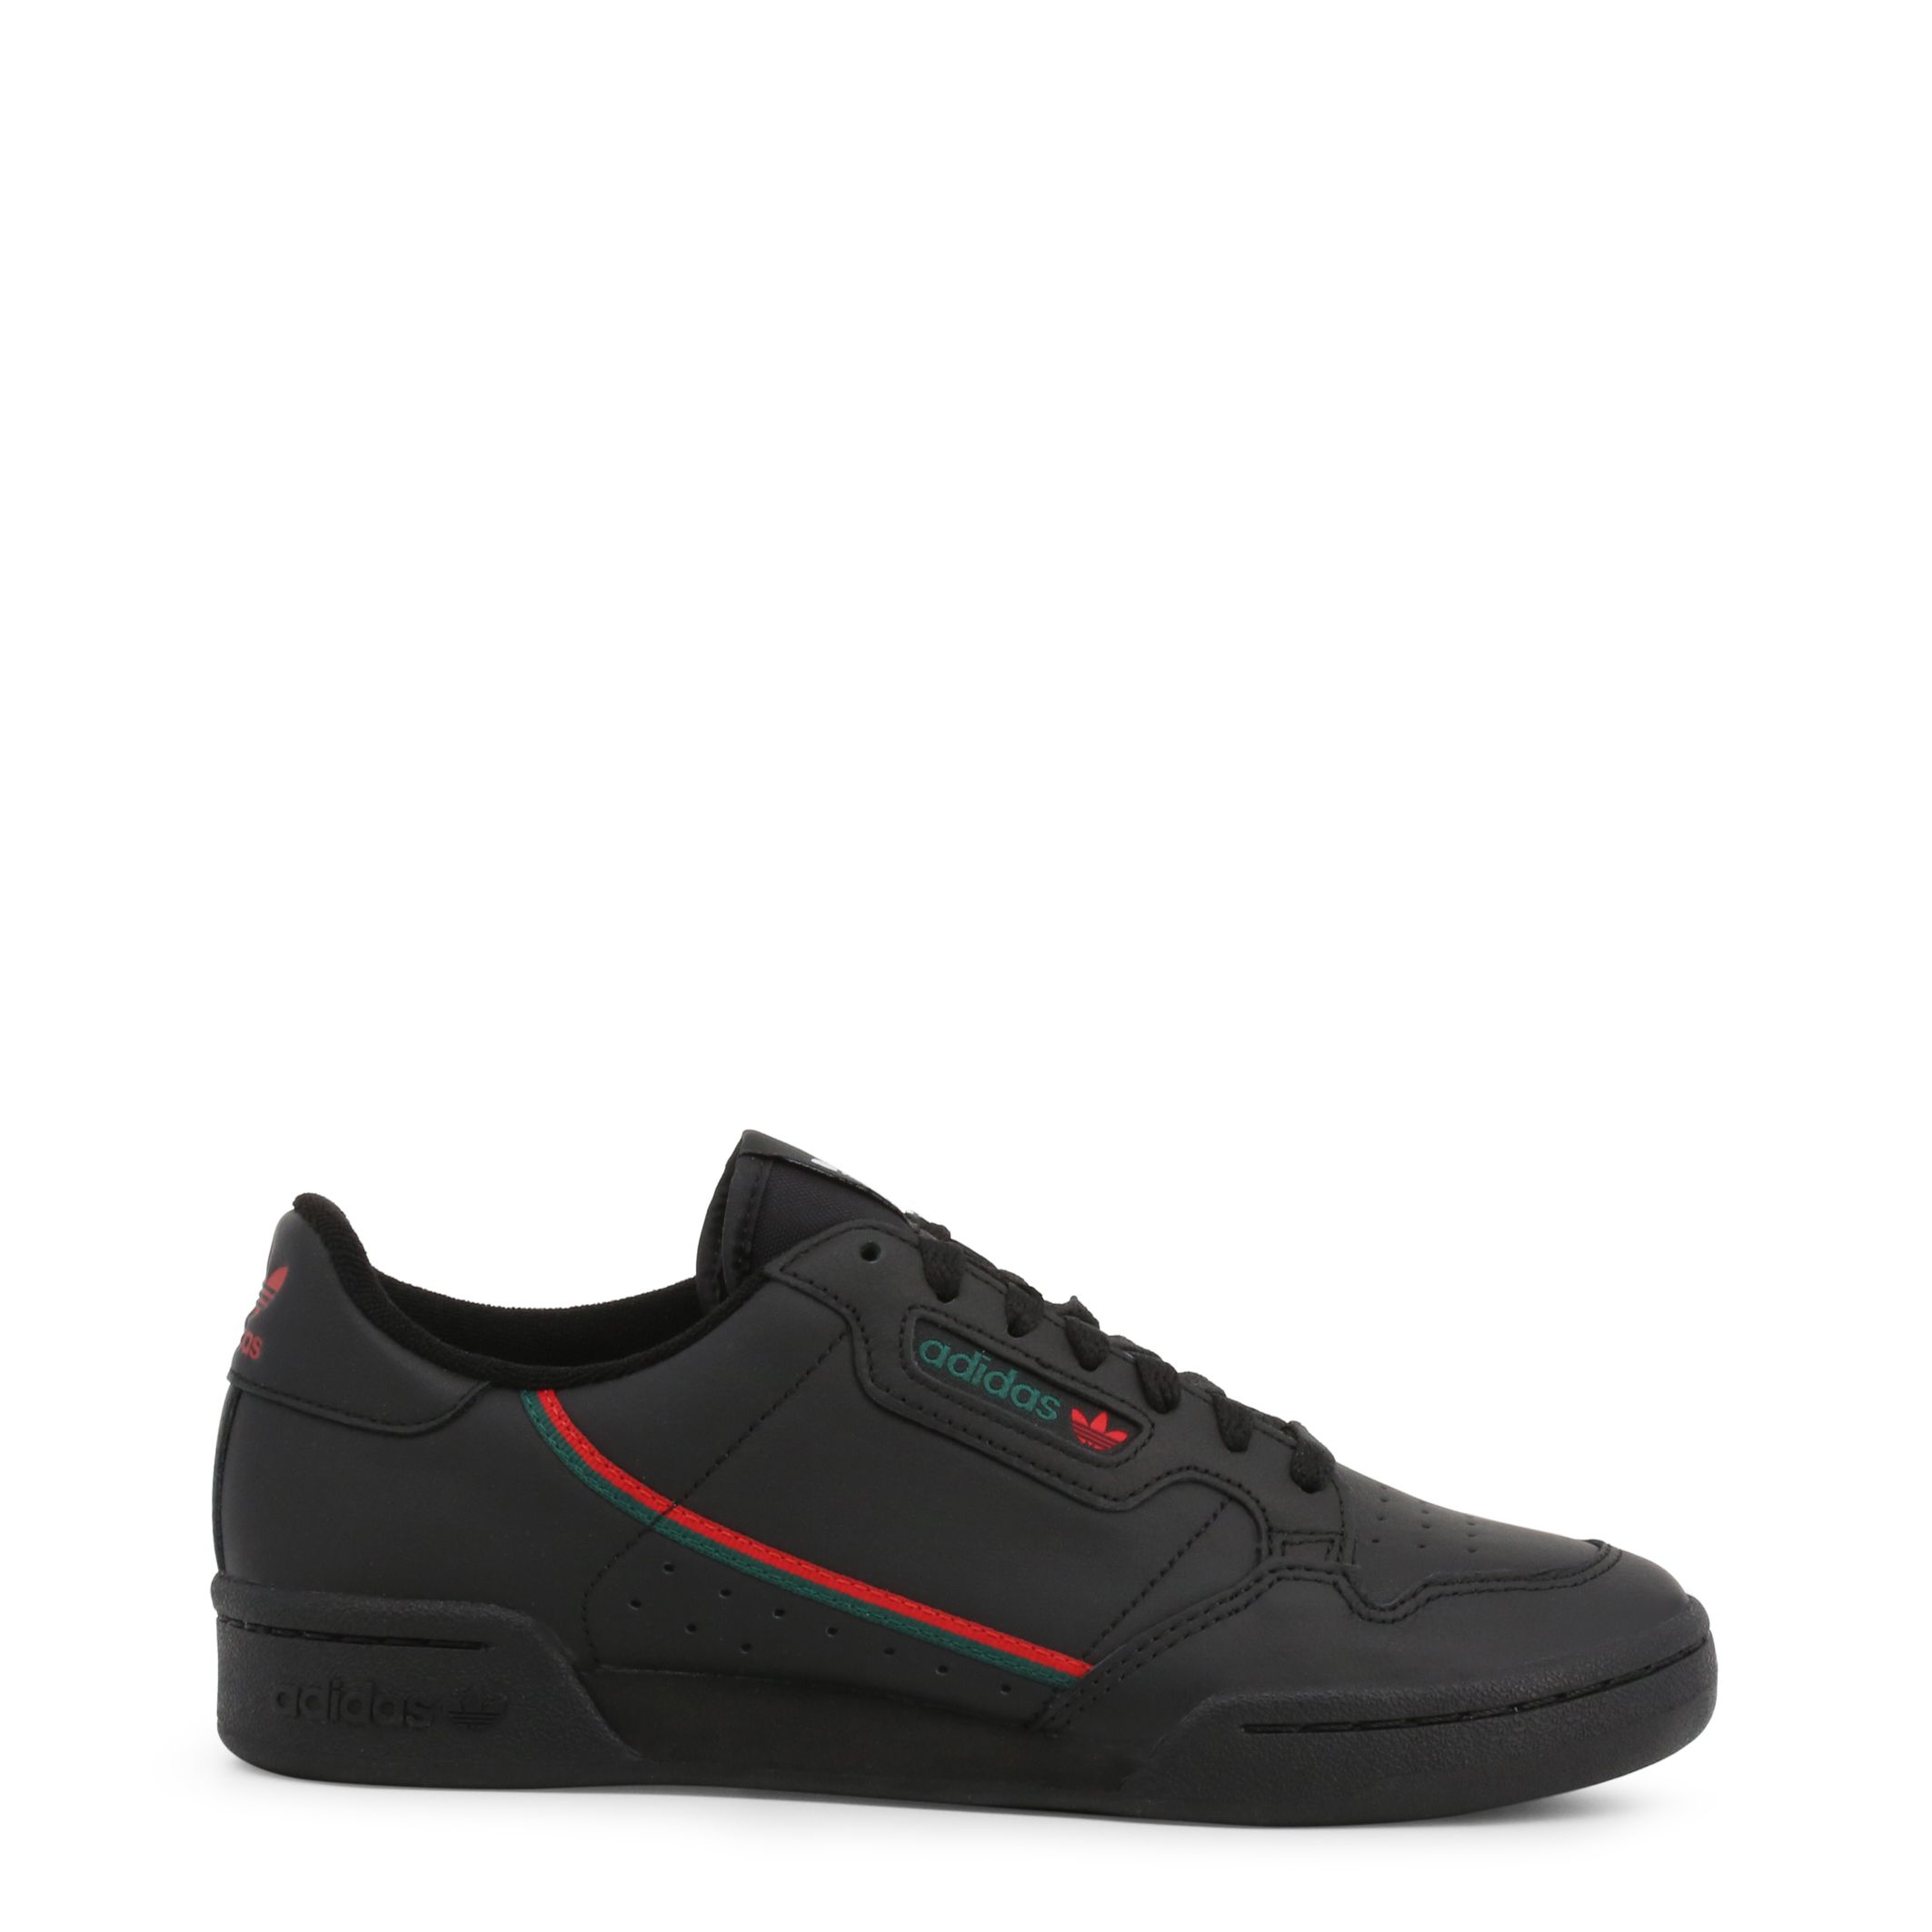 Gender: Unisex <br> Type: Sneakers <br> Upper: synthetic material, leather <br> Internal lining: fabric <br> Sole: rubber <br> Heel height cm: 2.5 <br> Details: round toe